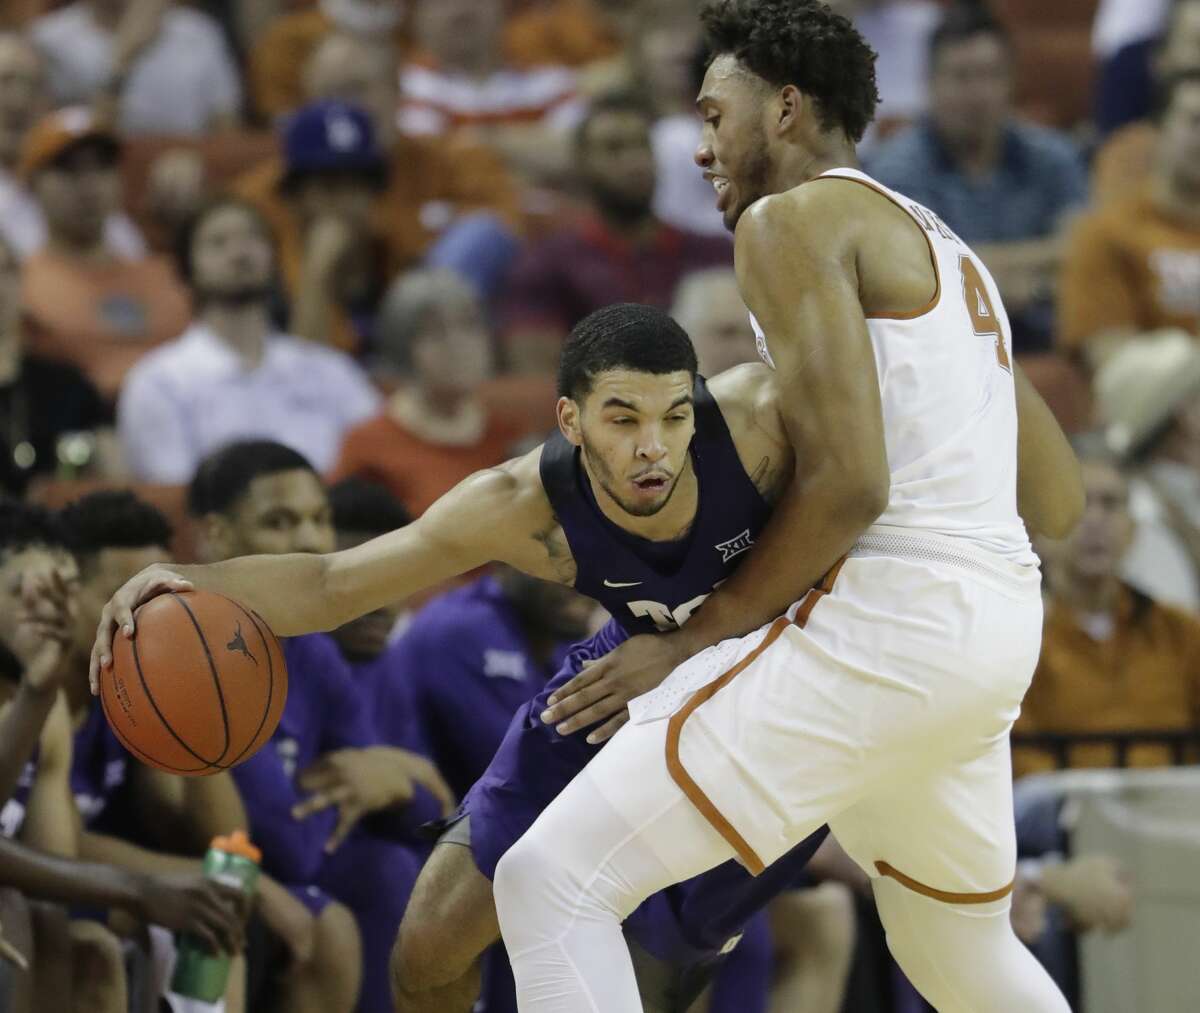 TCU guard Kenrich Williams, left, drives around Texas center James Banks (4) during the second half of an NCAA college basketball game, Wednesday, Jan. 11, 2017, in Austin, Texas. TCU won 64-61.(AP Photo/Eric Gay)